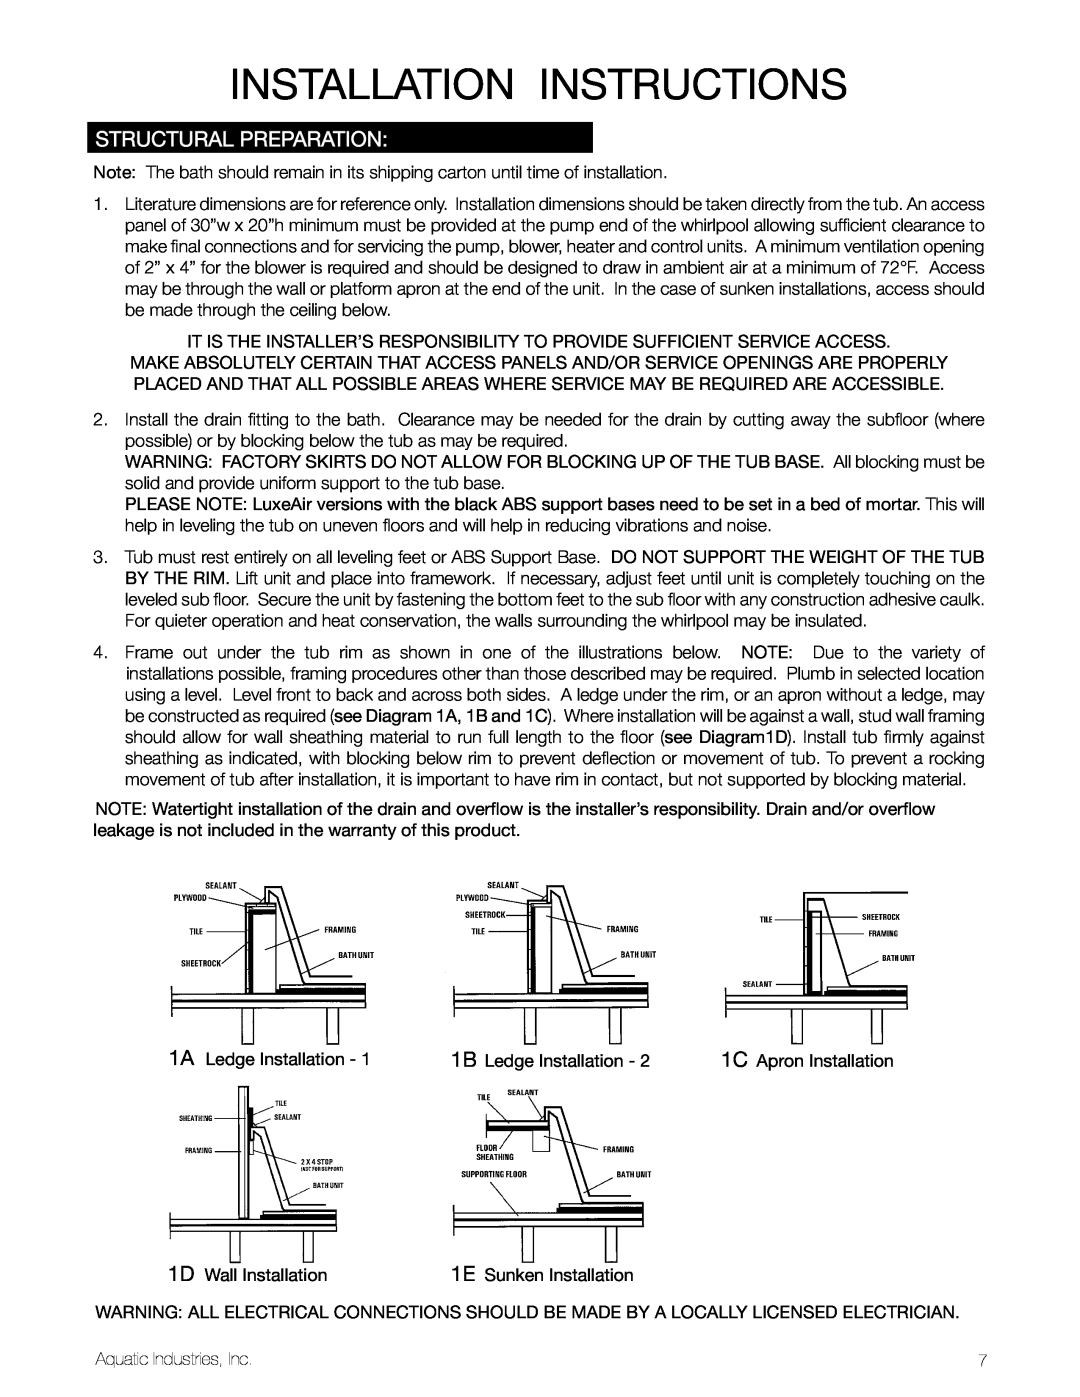 Aquatic LuxeAir Series owner manual Installation Instructions, Structural Preparation 